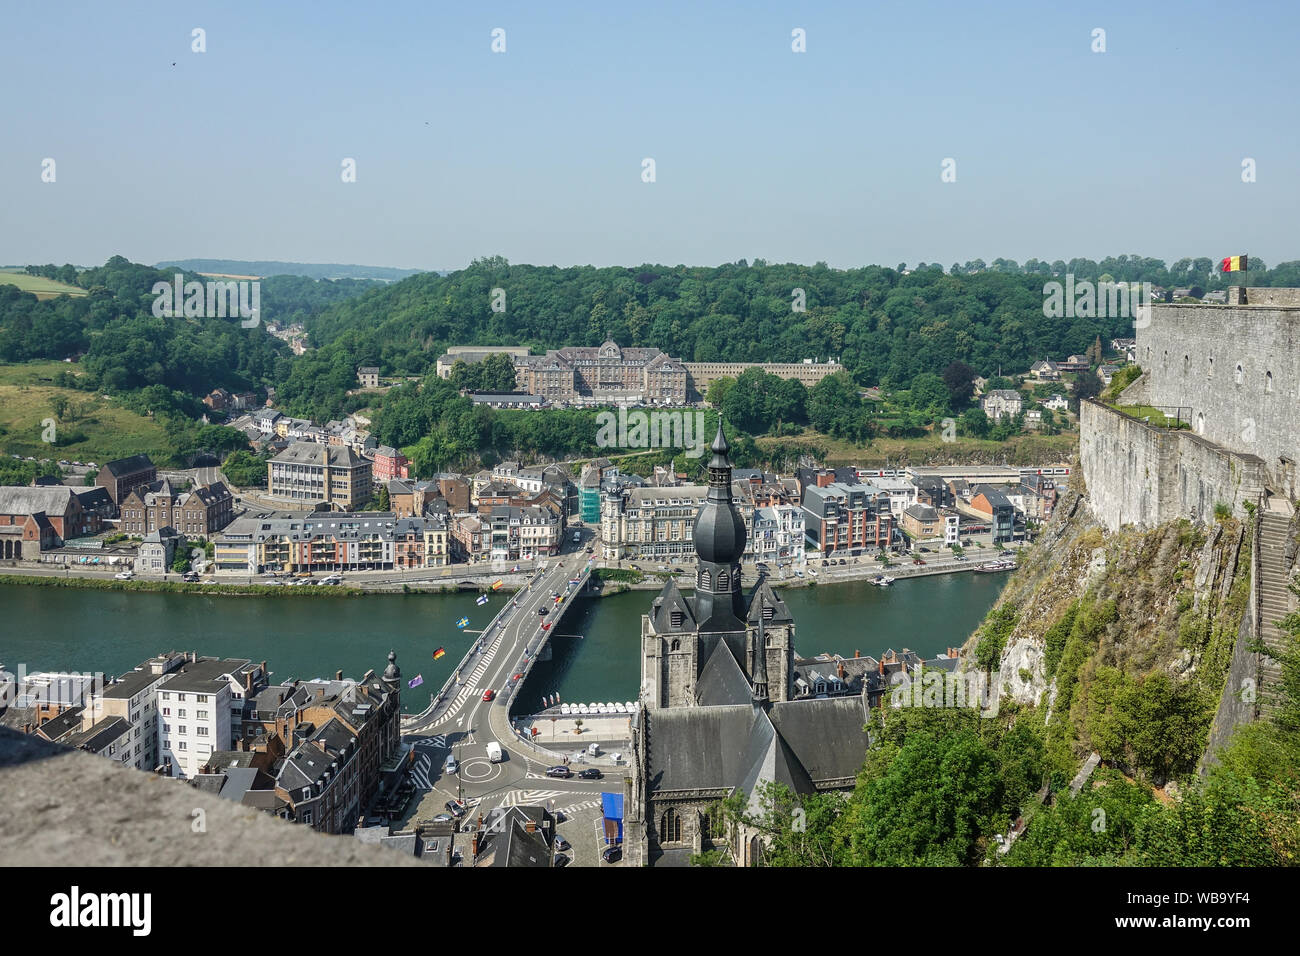 Dinant, Belgium - June 26, 2019: Seen from Citadelle. Large building on top is College Notre Dame de Bellevue, school system from primary to high scho Stock Photo